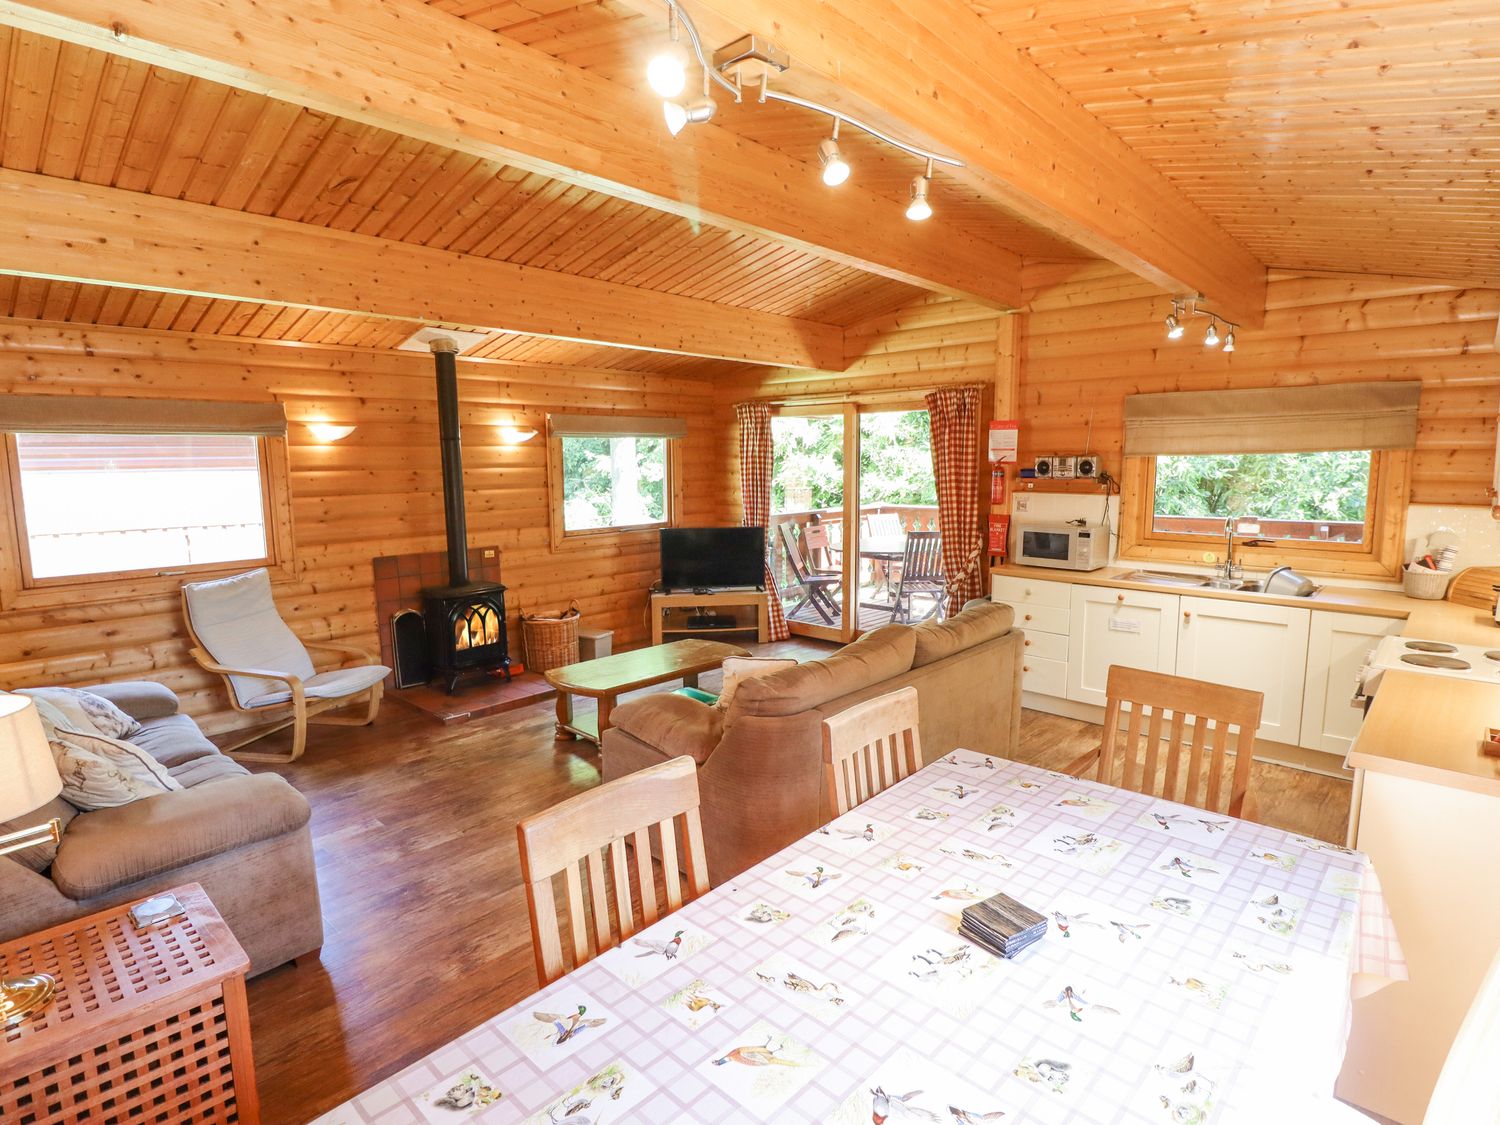 64 Acorn Lodge Kenwick Park, Louth, Lincolnshire. Hot tub. Woodburning stove. Off-road parking for 2